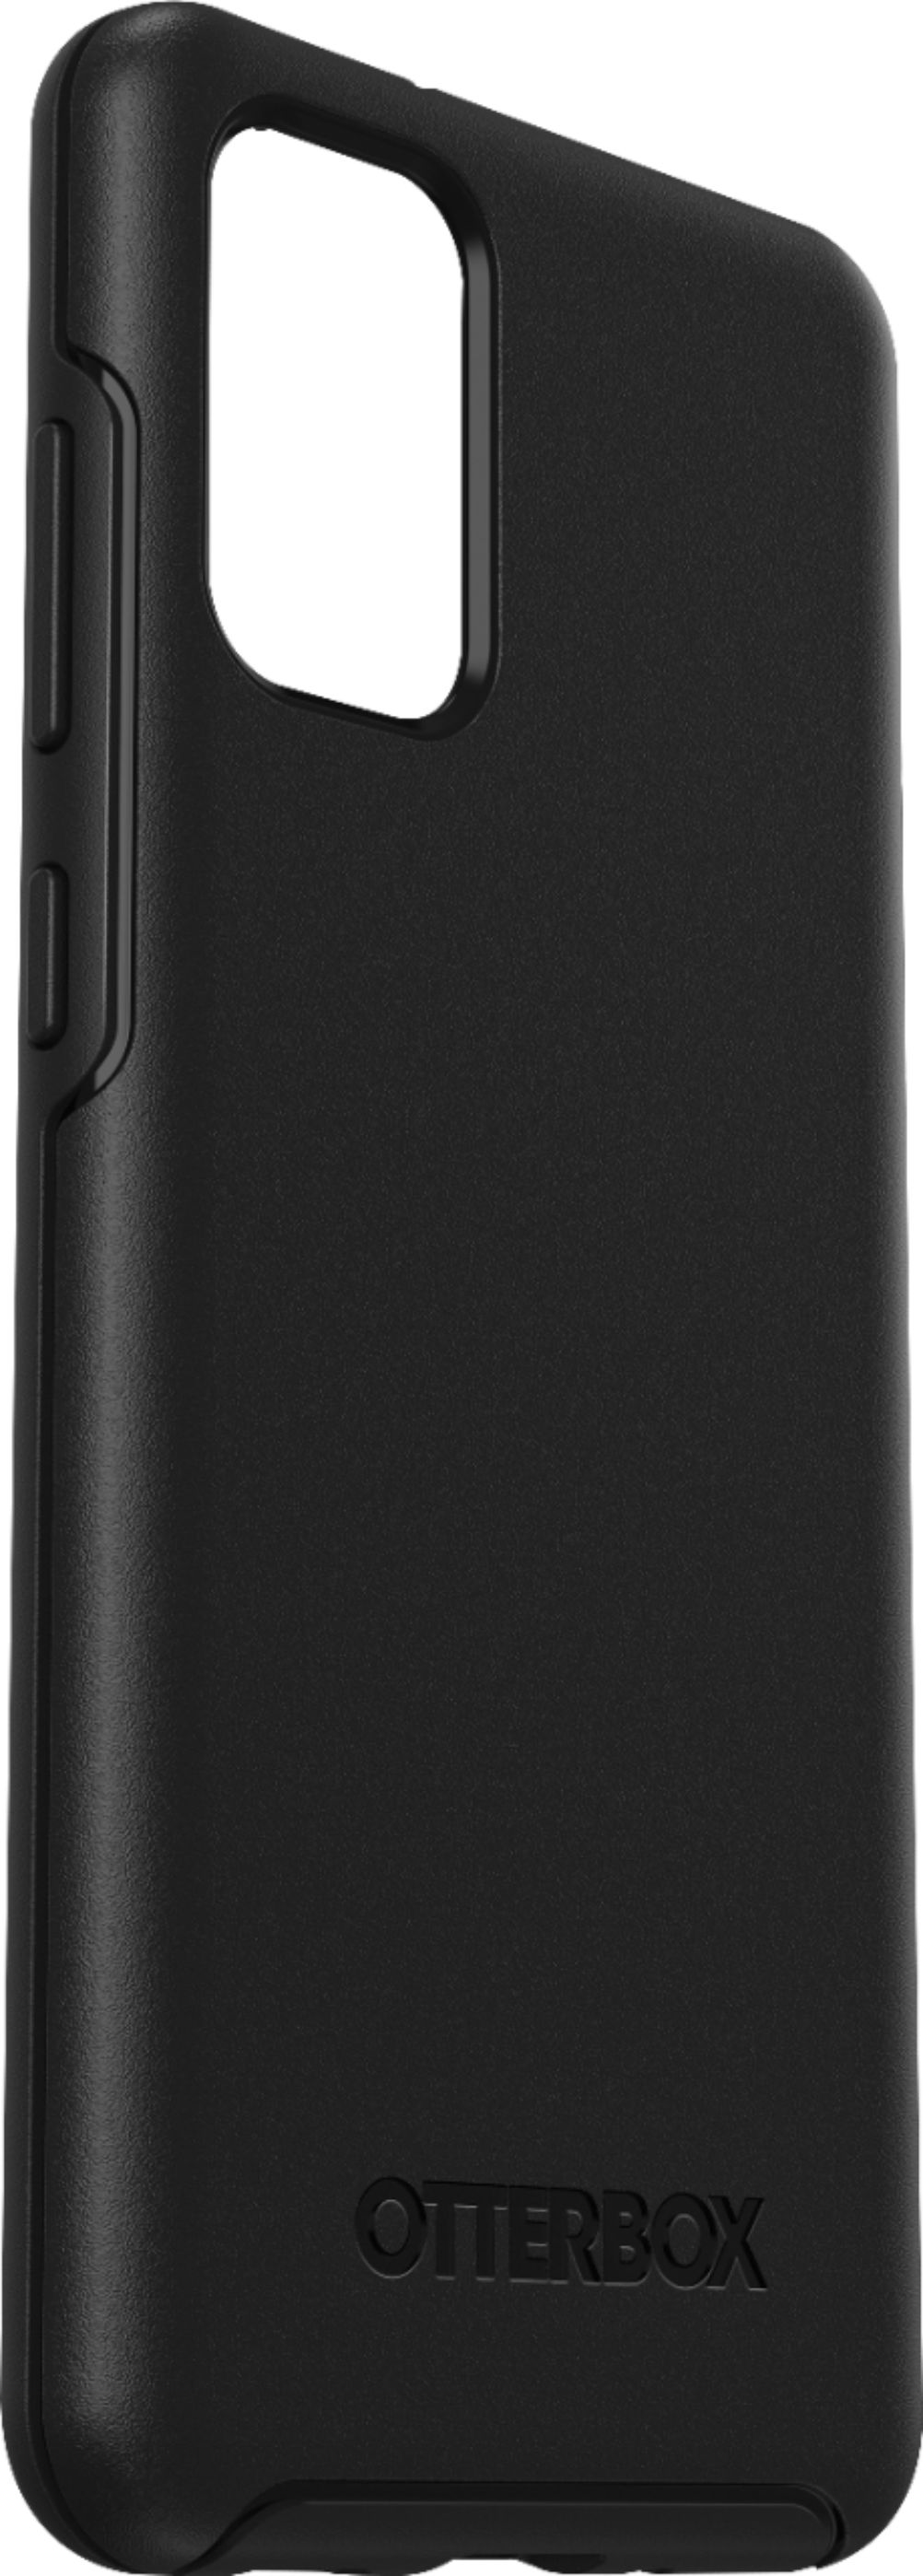 Angle View: OtterBox - Symmetry Series Case for Samsung Galaxy S20+ 5G - Black